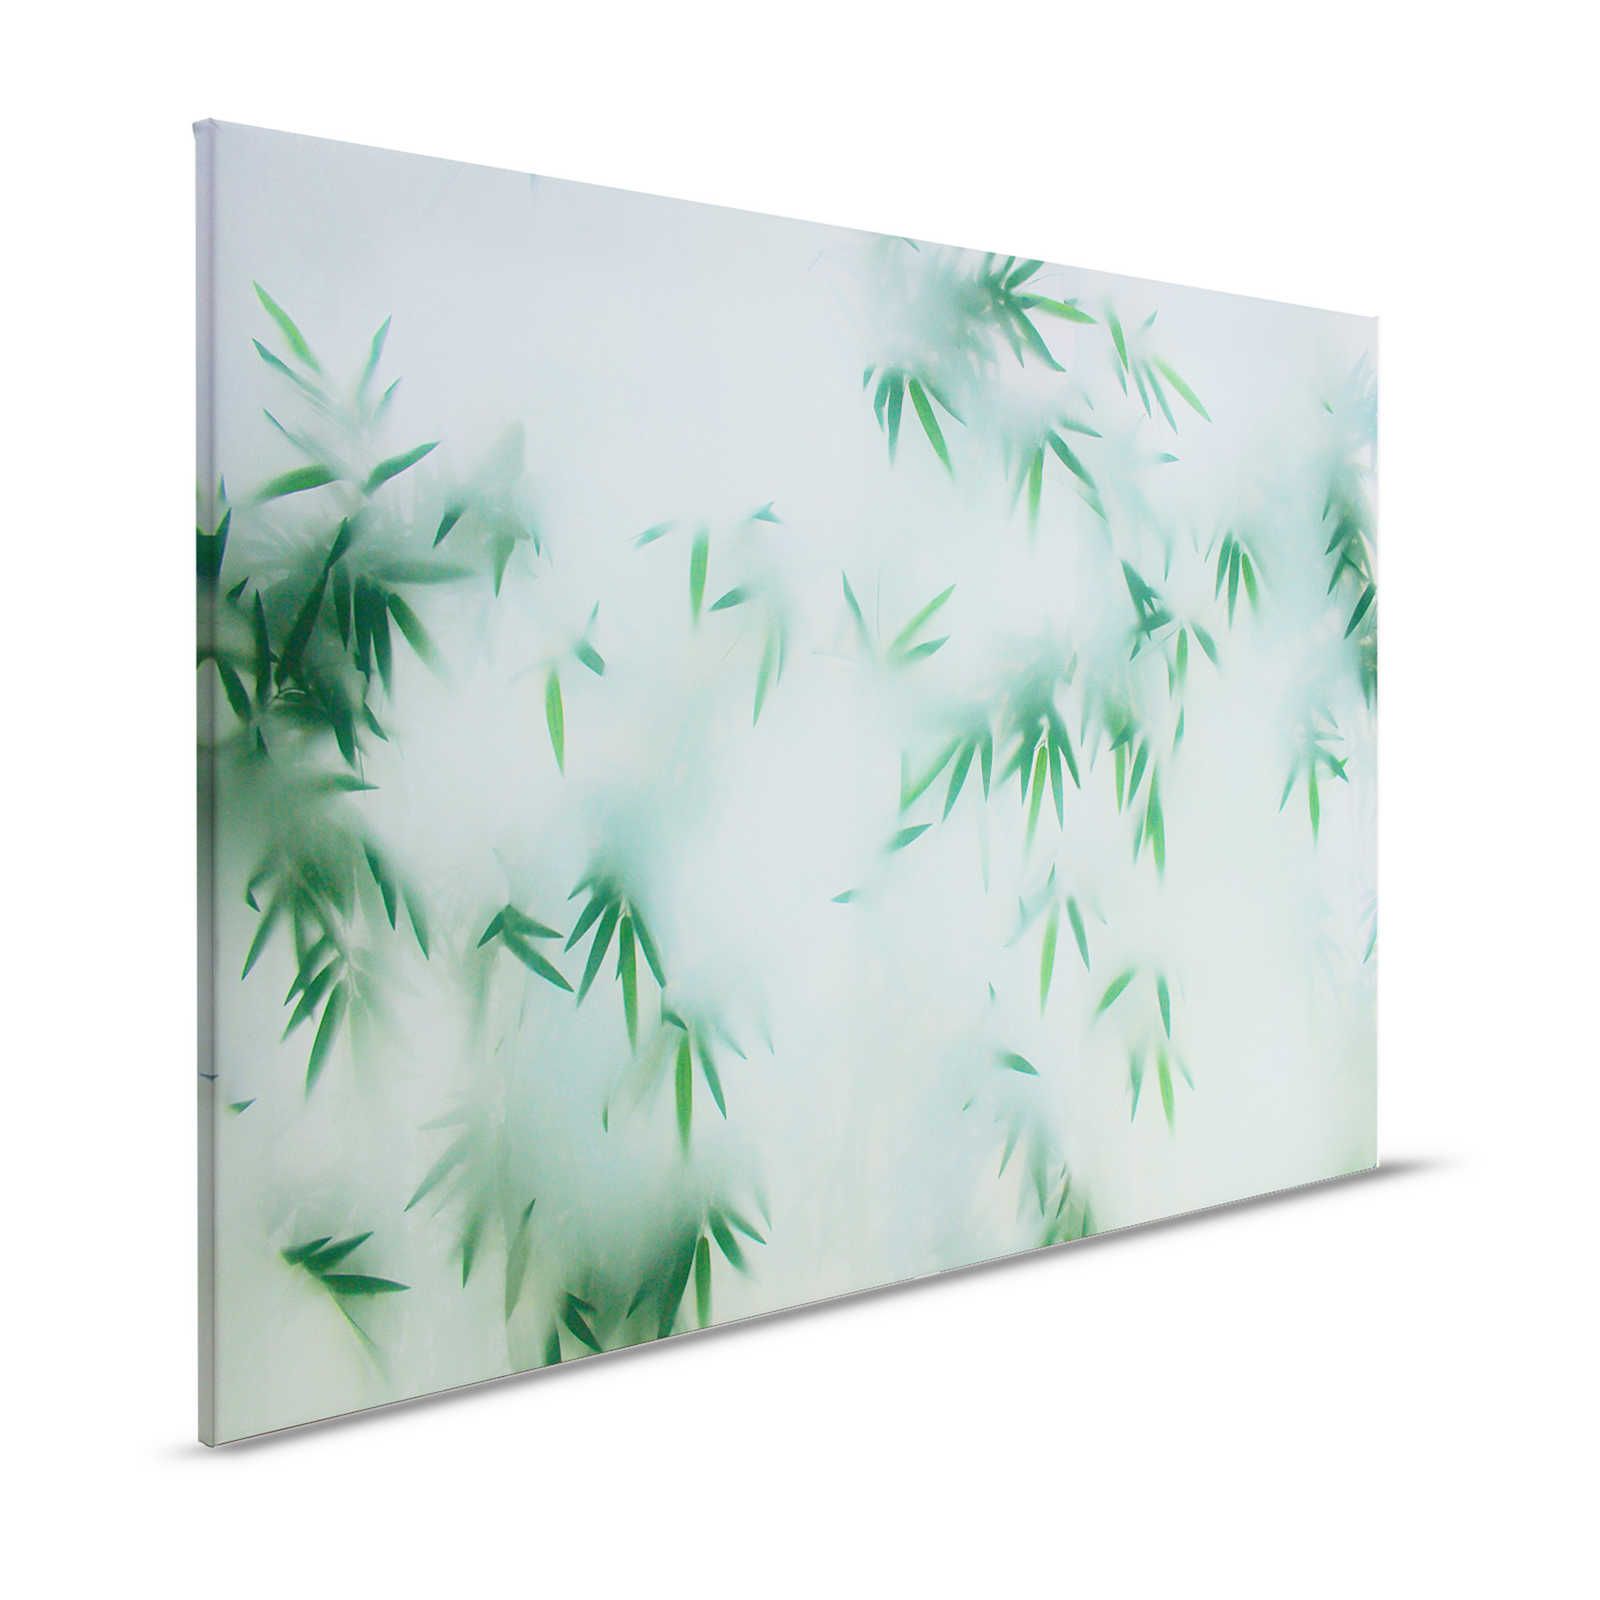 Panda Paradise 1 - Bamboo Canvas painting Green Leaves in the Mist - 1.20 m x 0.80 m
